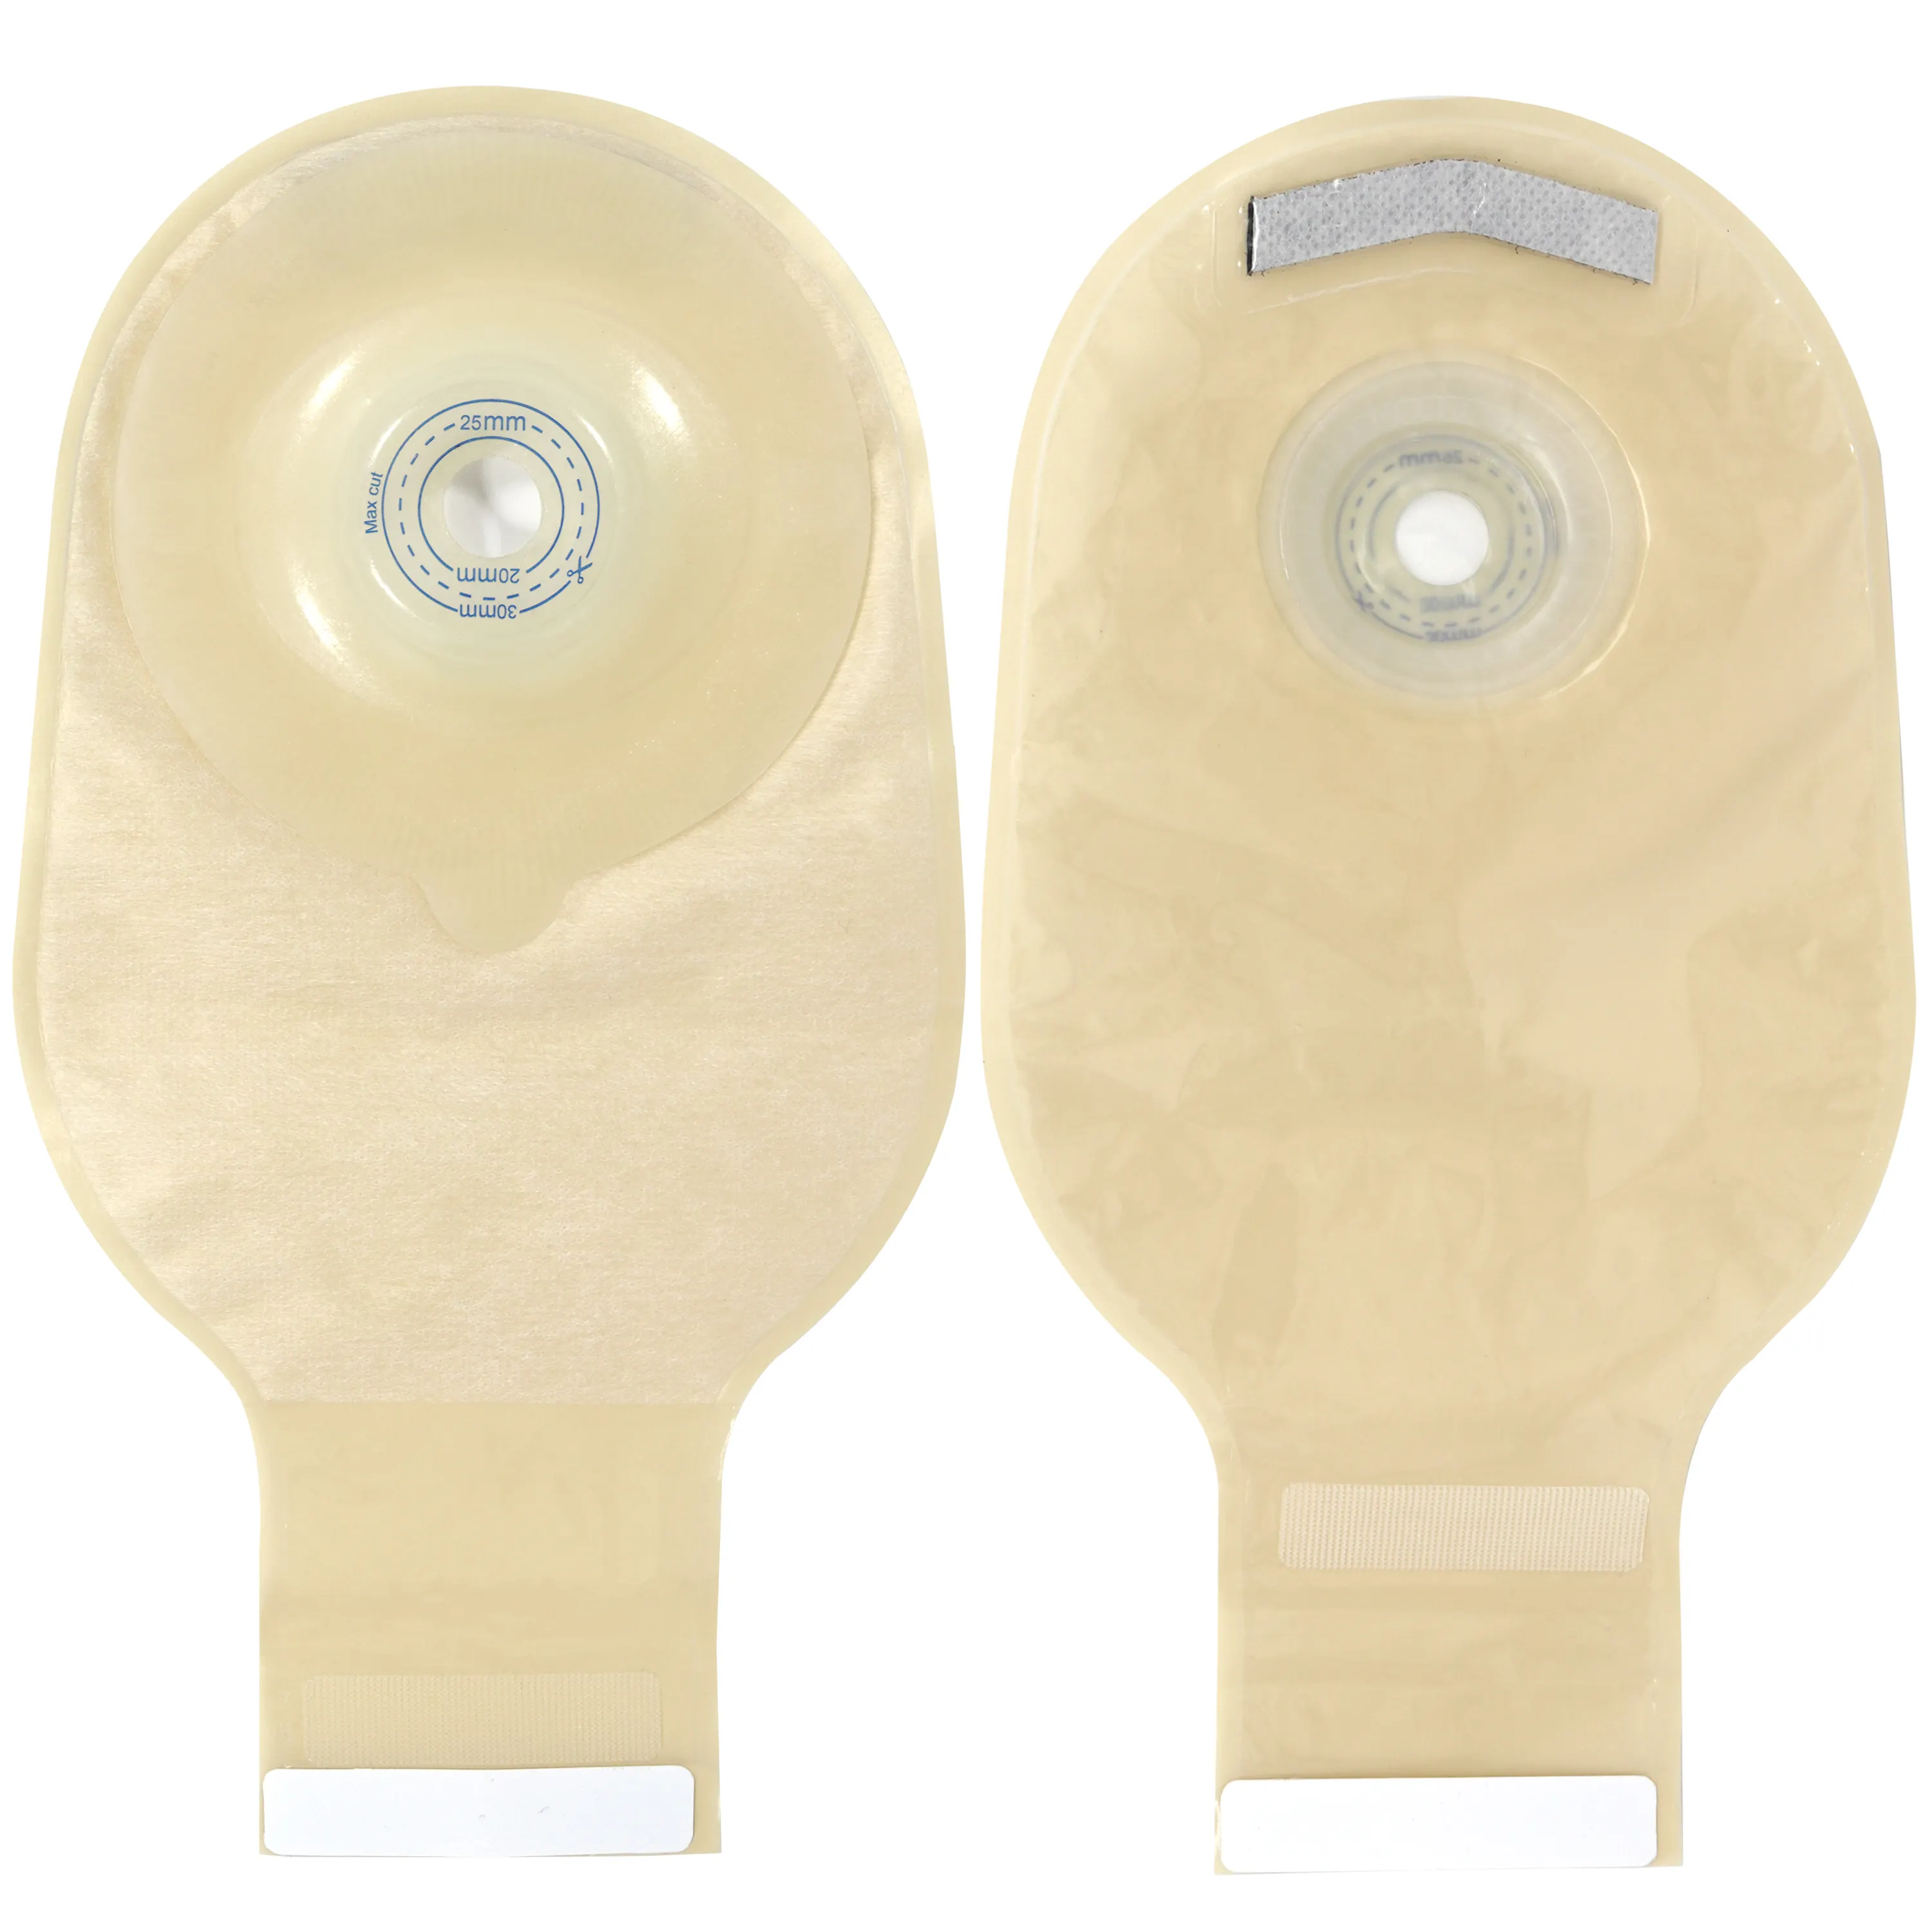 China manufacturer direct supply New Convex colostomia bag with hook and loop